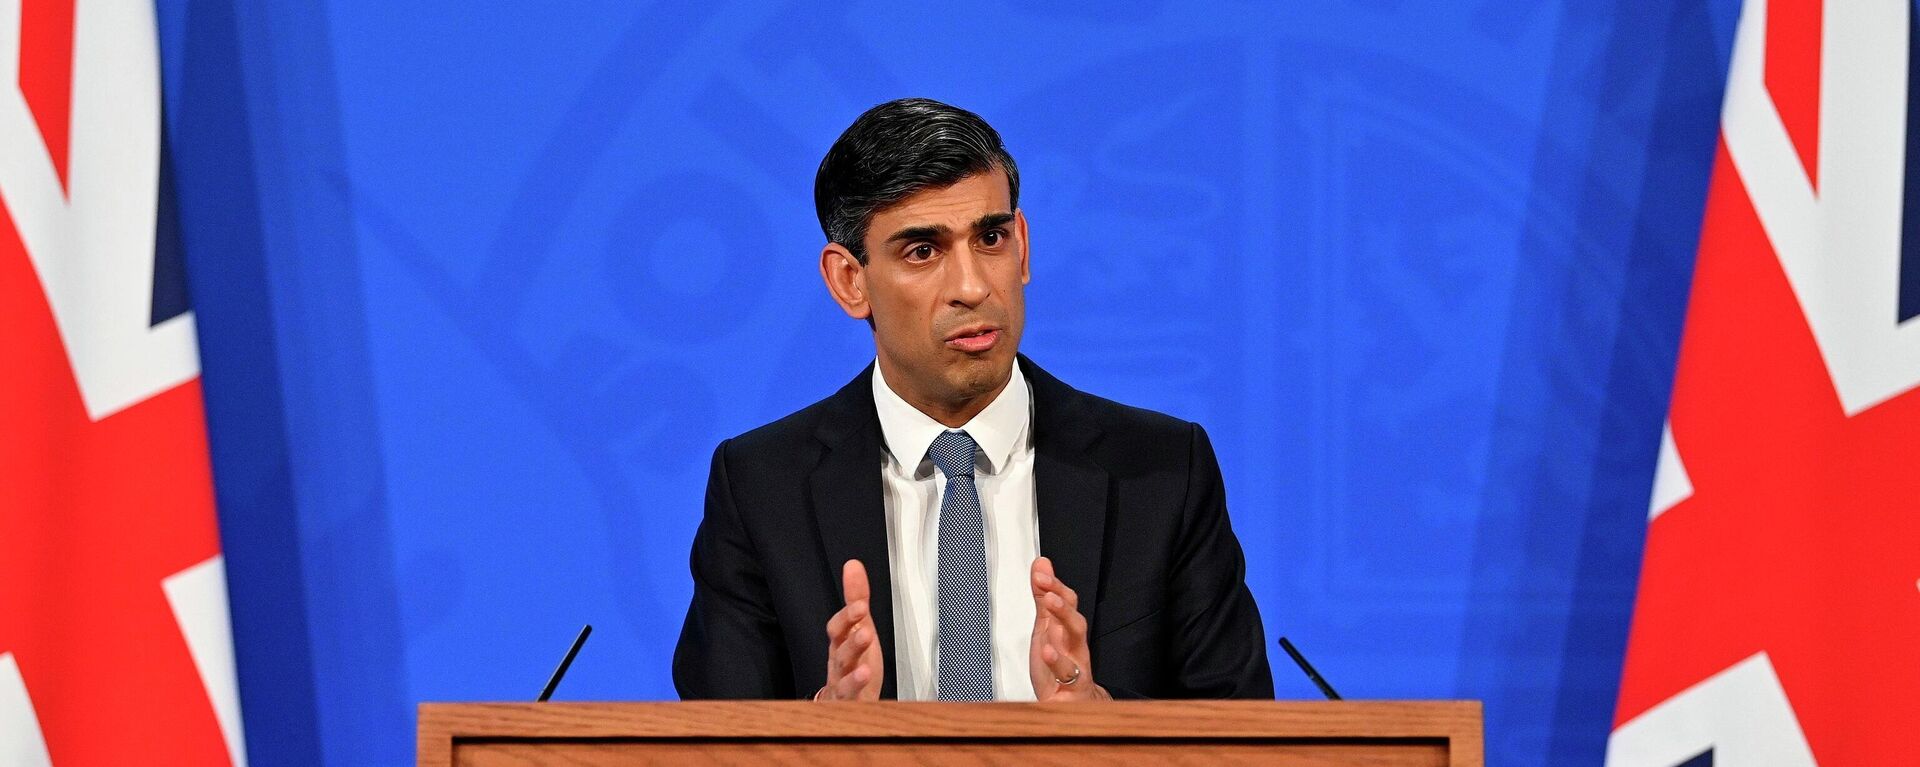 Britain's Chancellor of the Exchequer Rishi Sunak holds a press conference in the Downing Street briefing room, London, Thursday Feb. 3, 2022. Britain's energy regulator announced Thursday that a cap on energy prices is going up by a record 54% because of the soaring costs of wholesale natural gas, a change that will significantly burden millions of households already squeezed by rapidly climbing bills. - Sputnik International, 1920, 09.07.2022